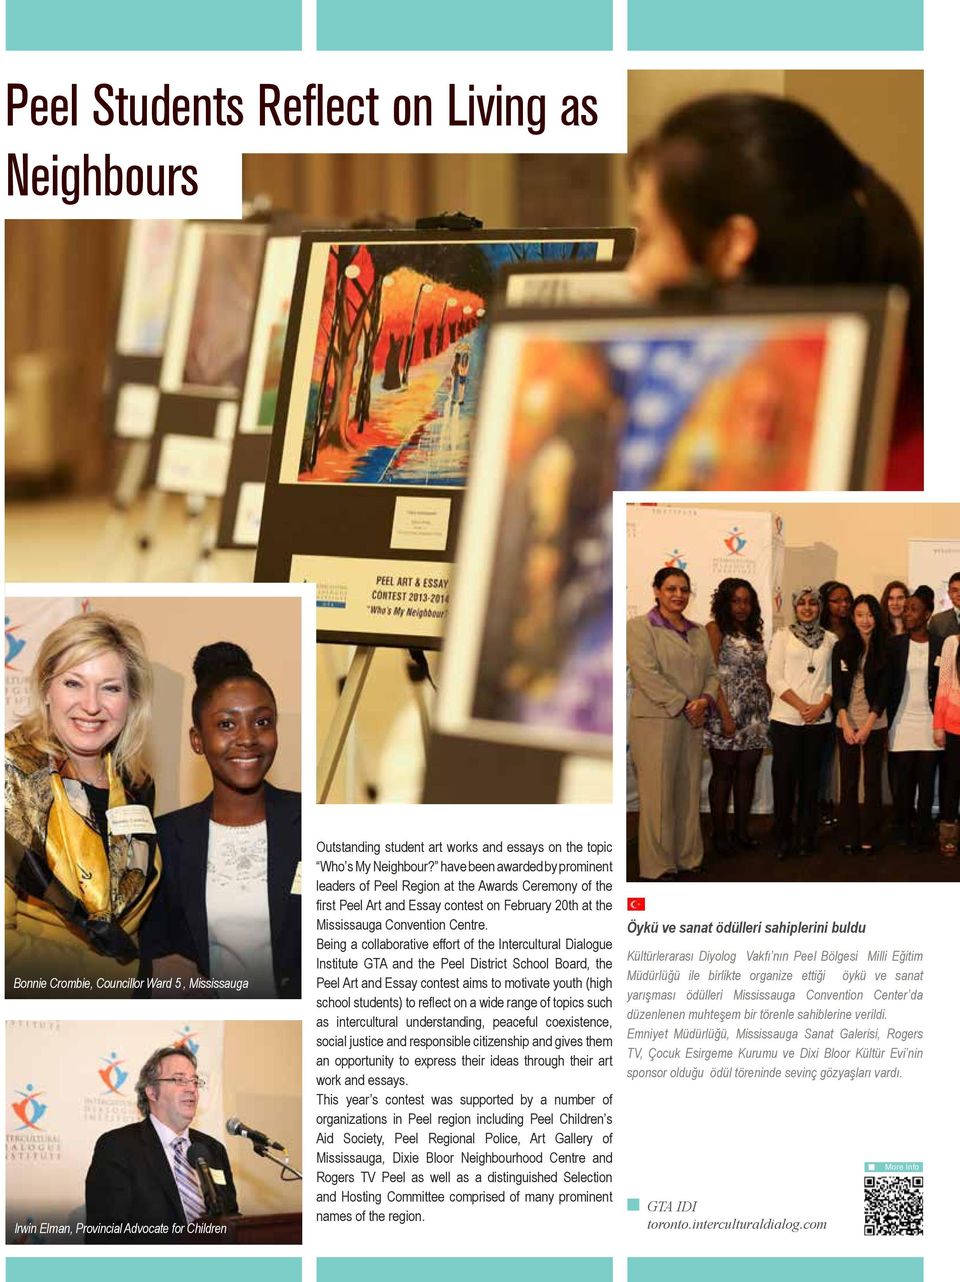 Being a collaborative effort of the Intercultural Dialogue Institute GTA and the Peel District School Board, the Peel Art and Essay contest aims to motivate youth (high school students) to reflect on